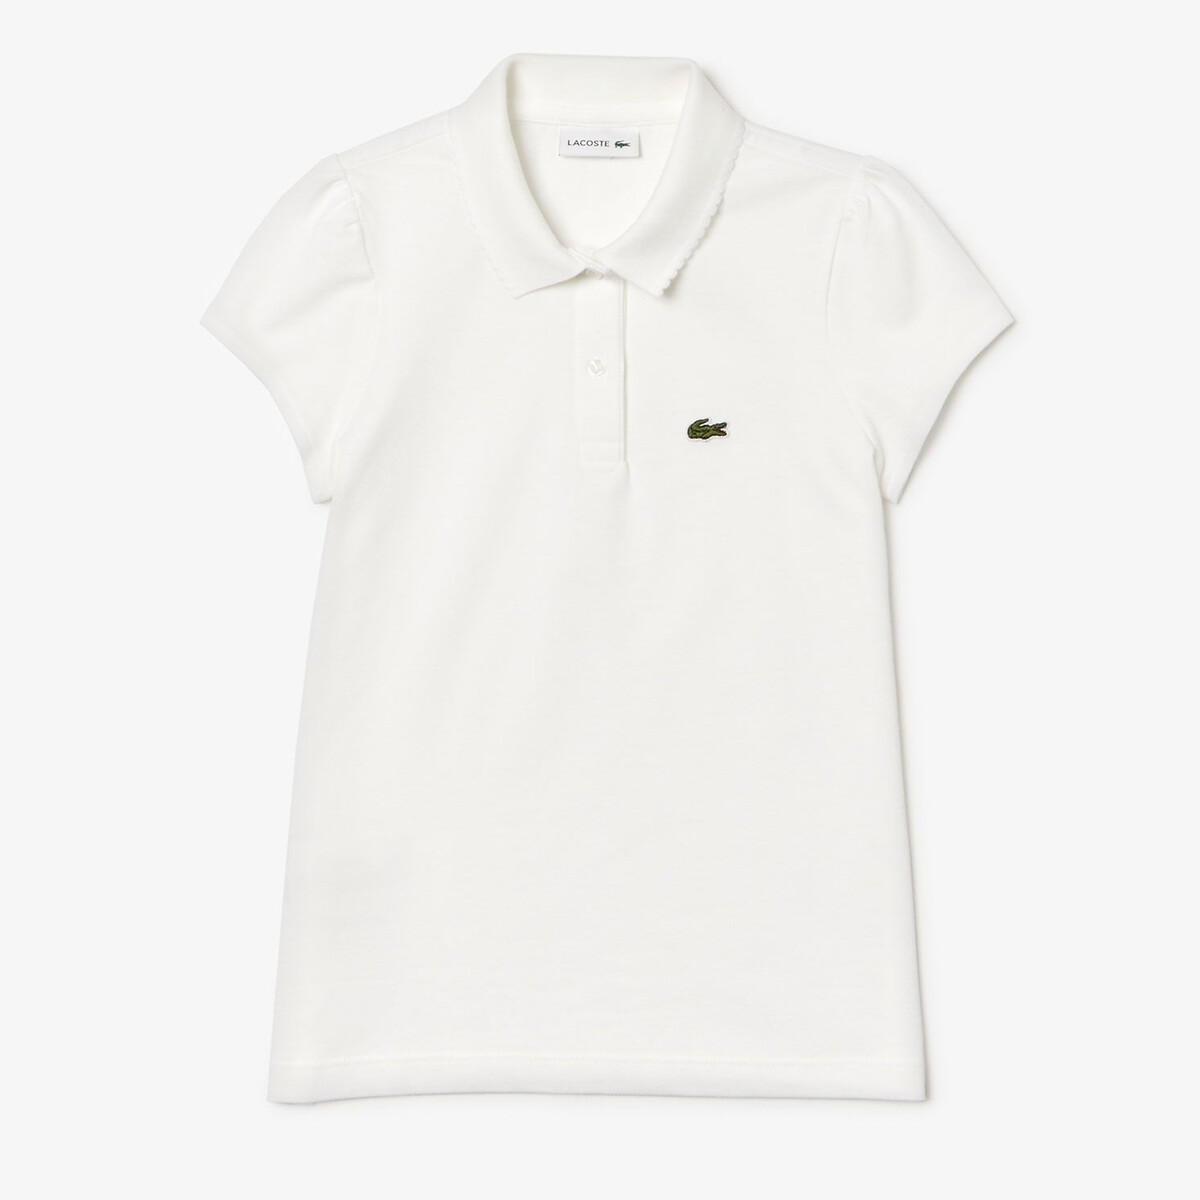 Image of Embroidered Logo Polo Shirt in Cotton with Short Sleeves, 6-12 Years